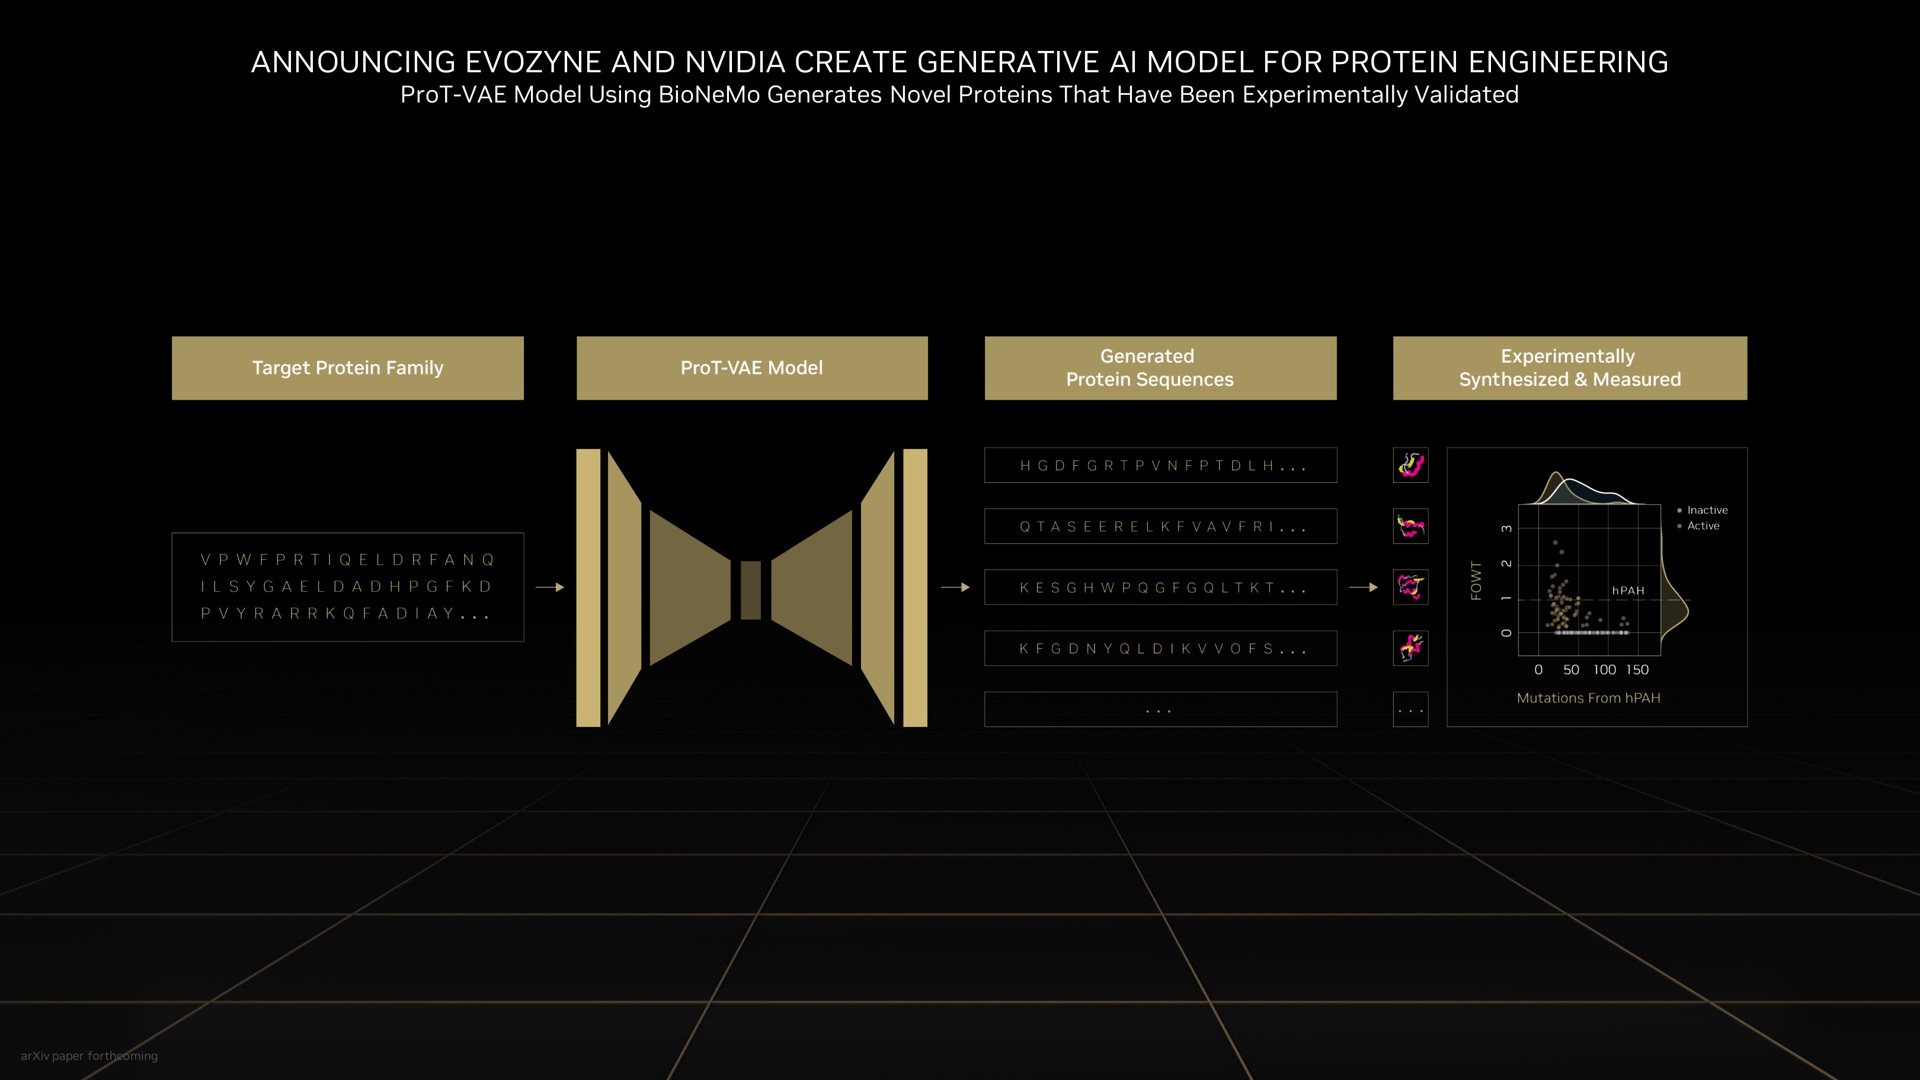 announcing and create generative model for protein engineering | NVIDIA